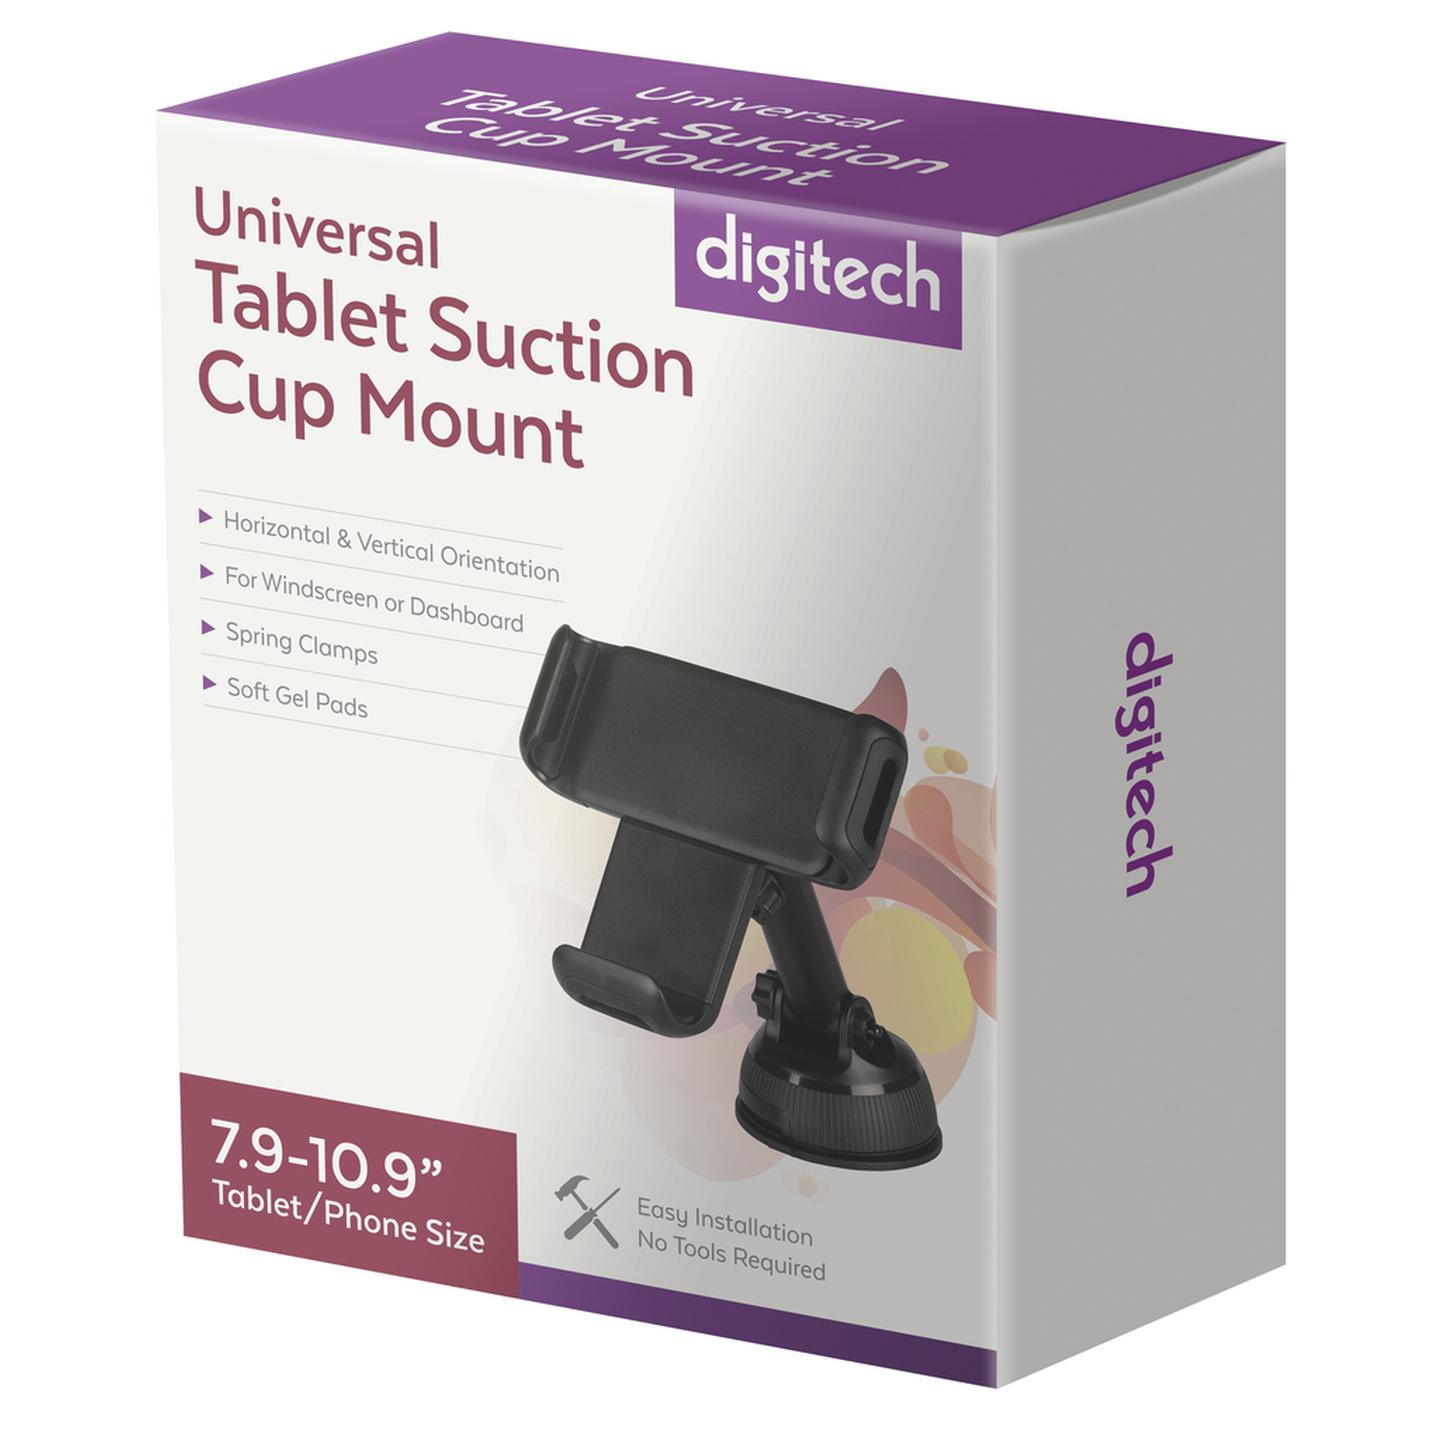 Universal Tablet Suction Cup Mount